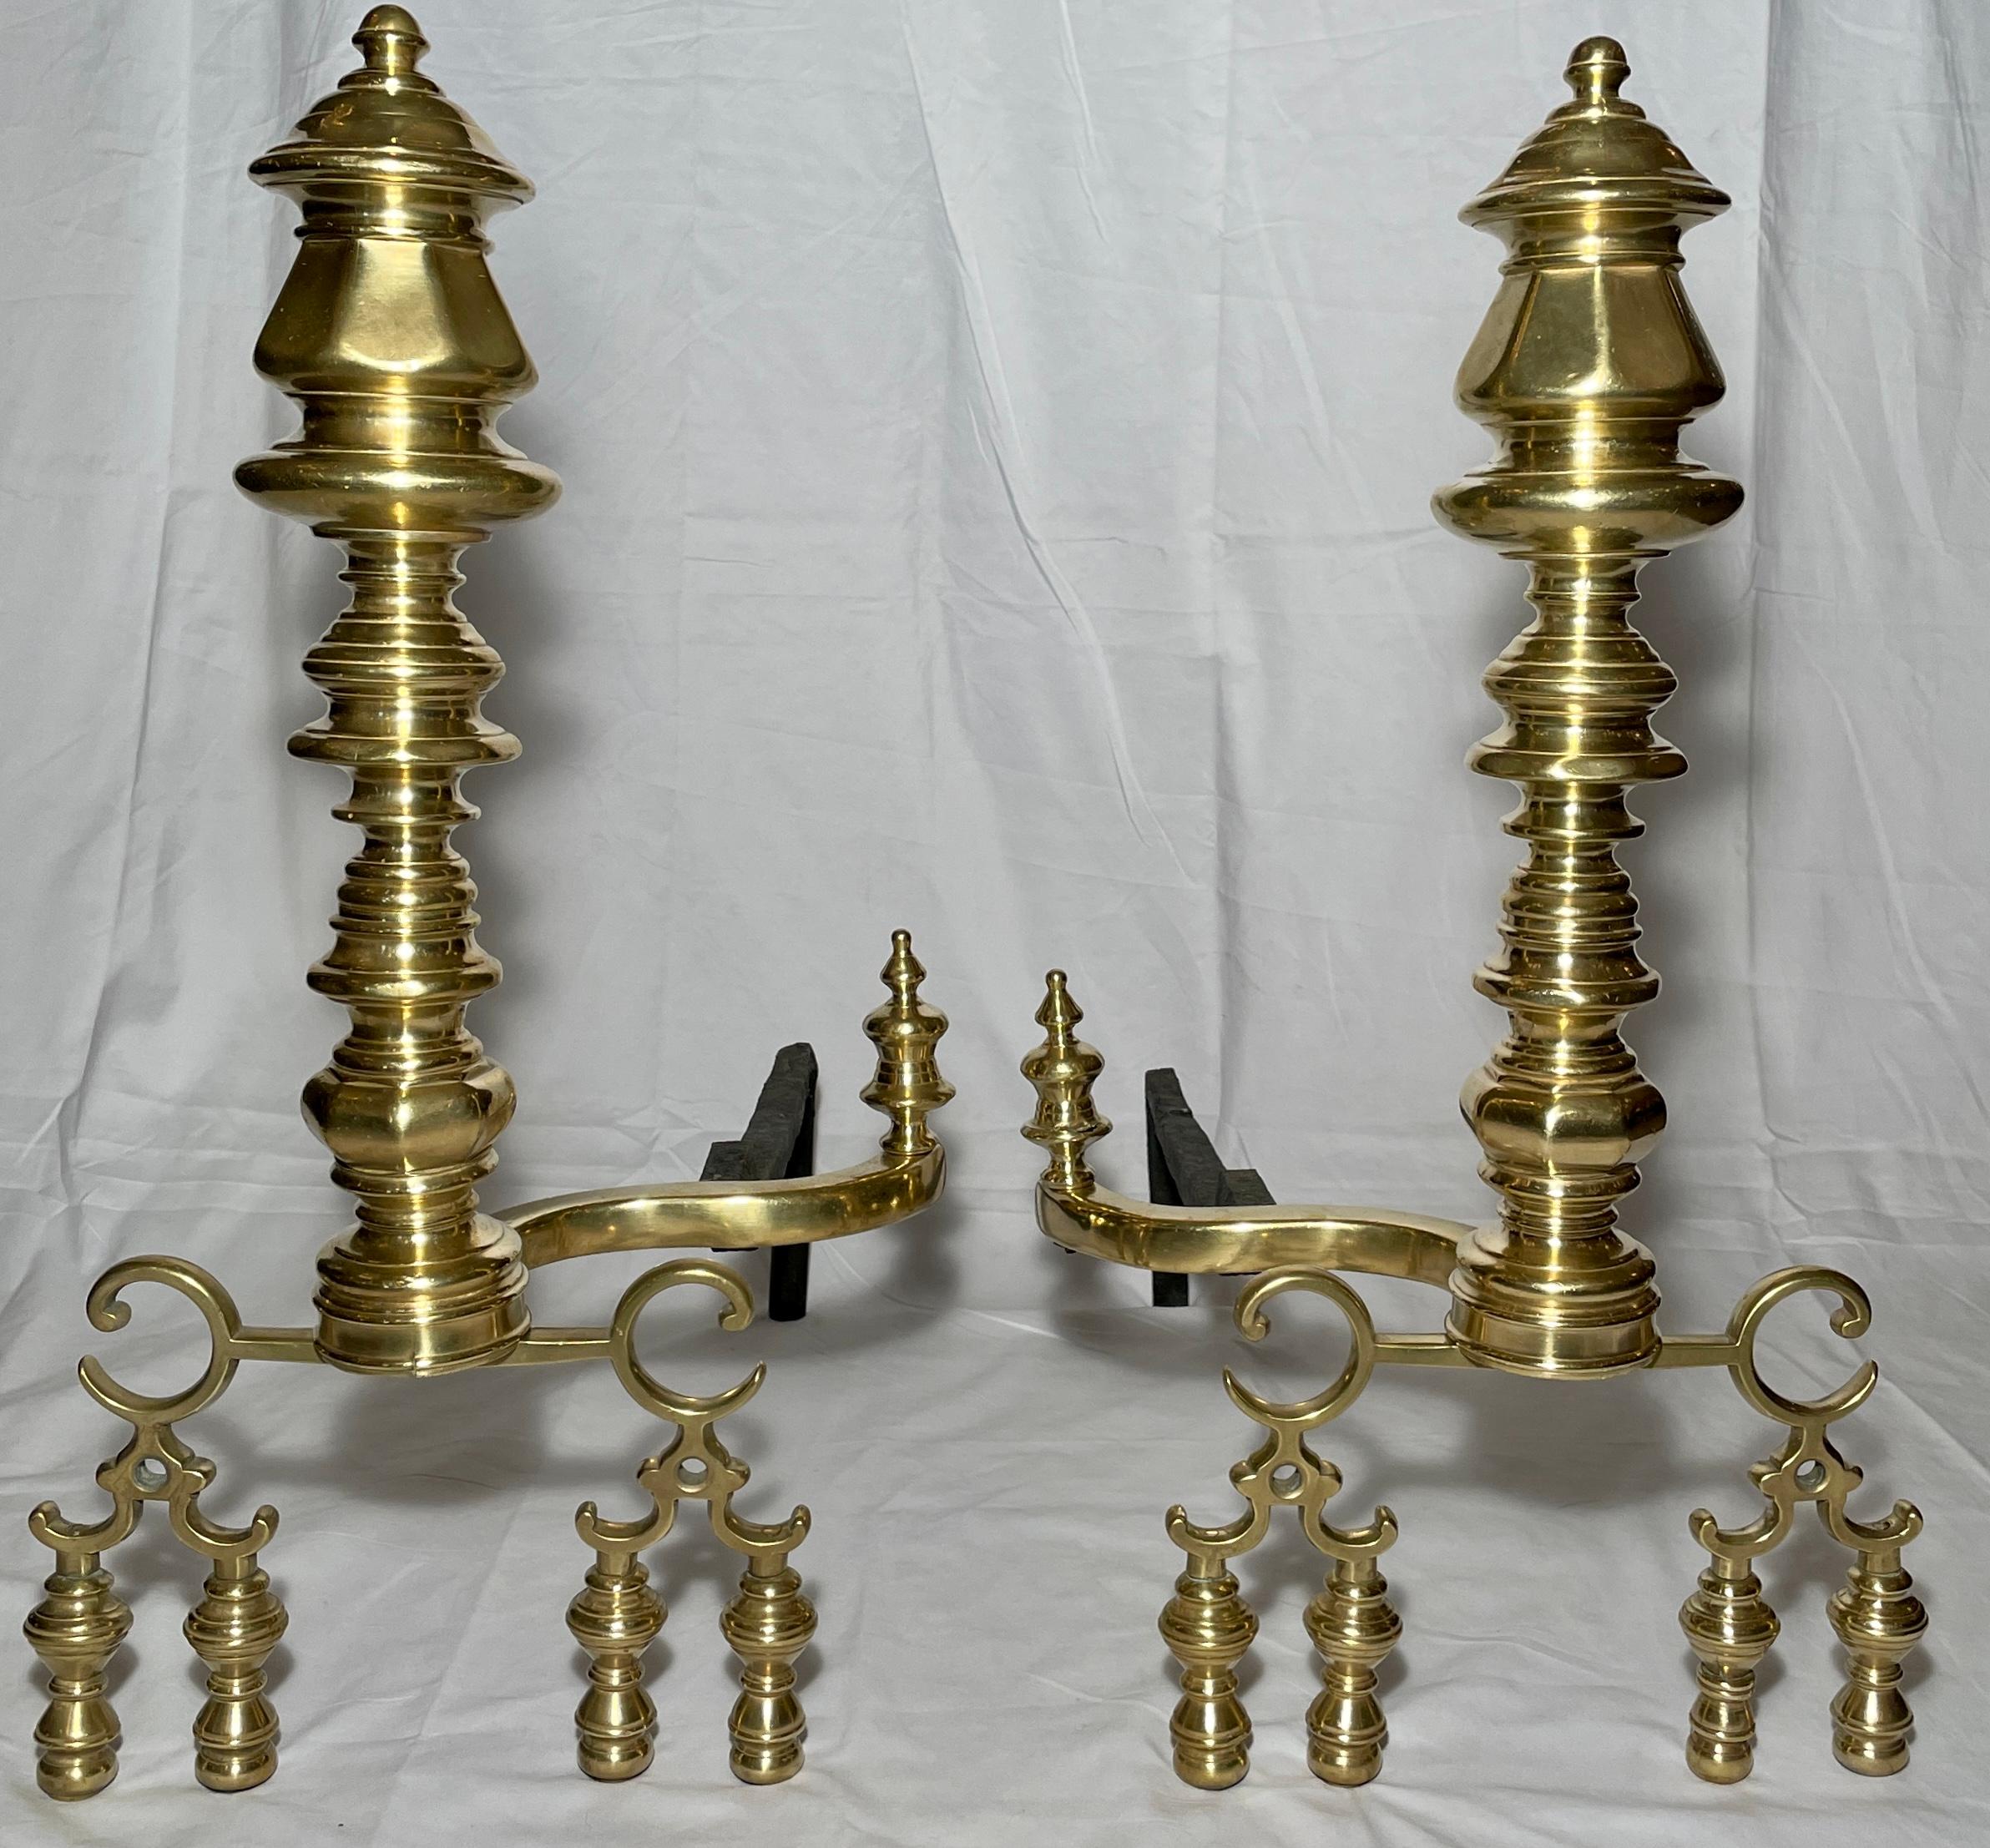 Antique English Grand-Scale Polished brass fireplace Andirons, circa 1860.